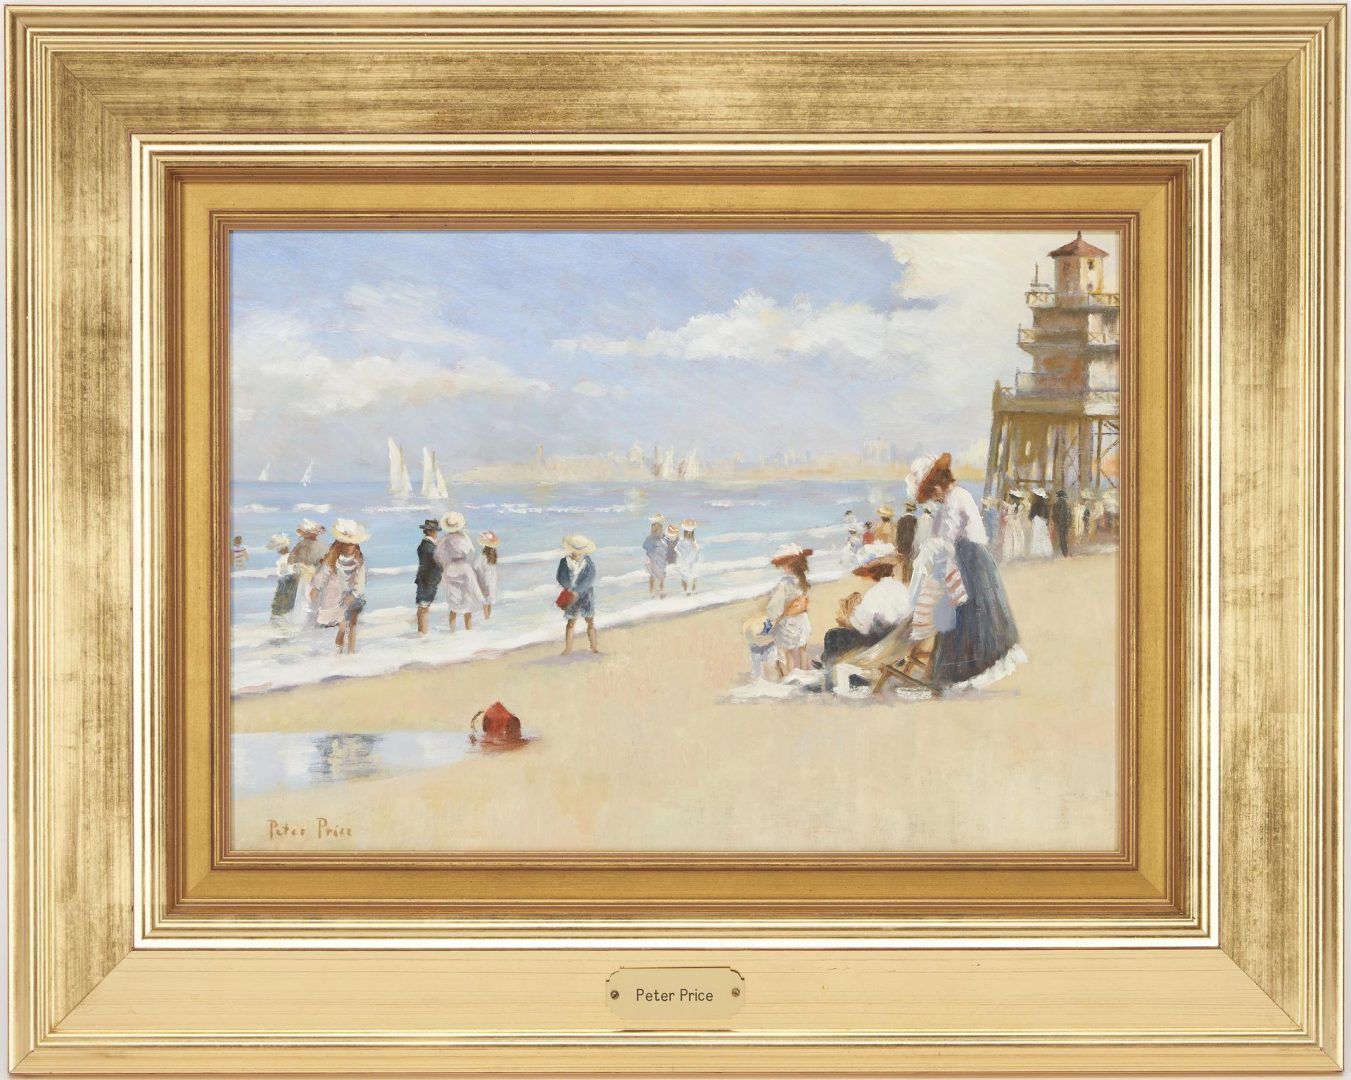 Lot 164: Peter Price O/B Beach Scene Painting with Figures